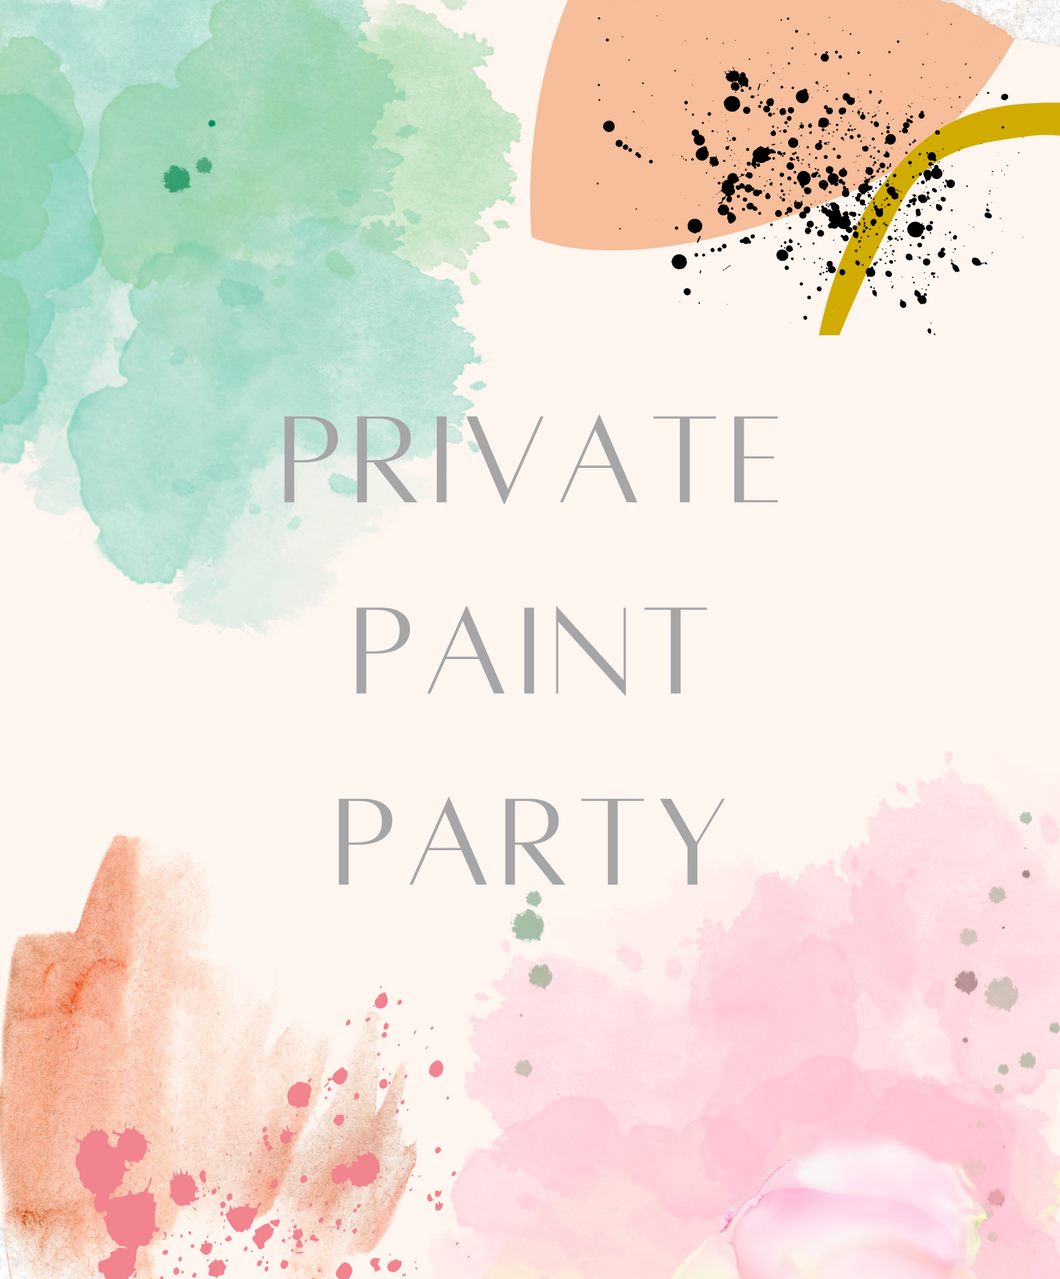 Private Event - Chris & Jo's Painting Party - THURSDAY 27th June - 2pm